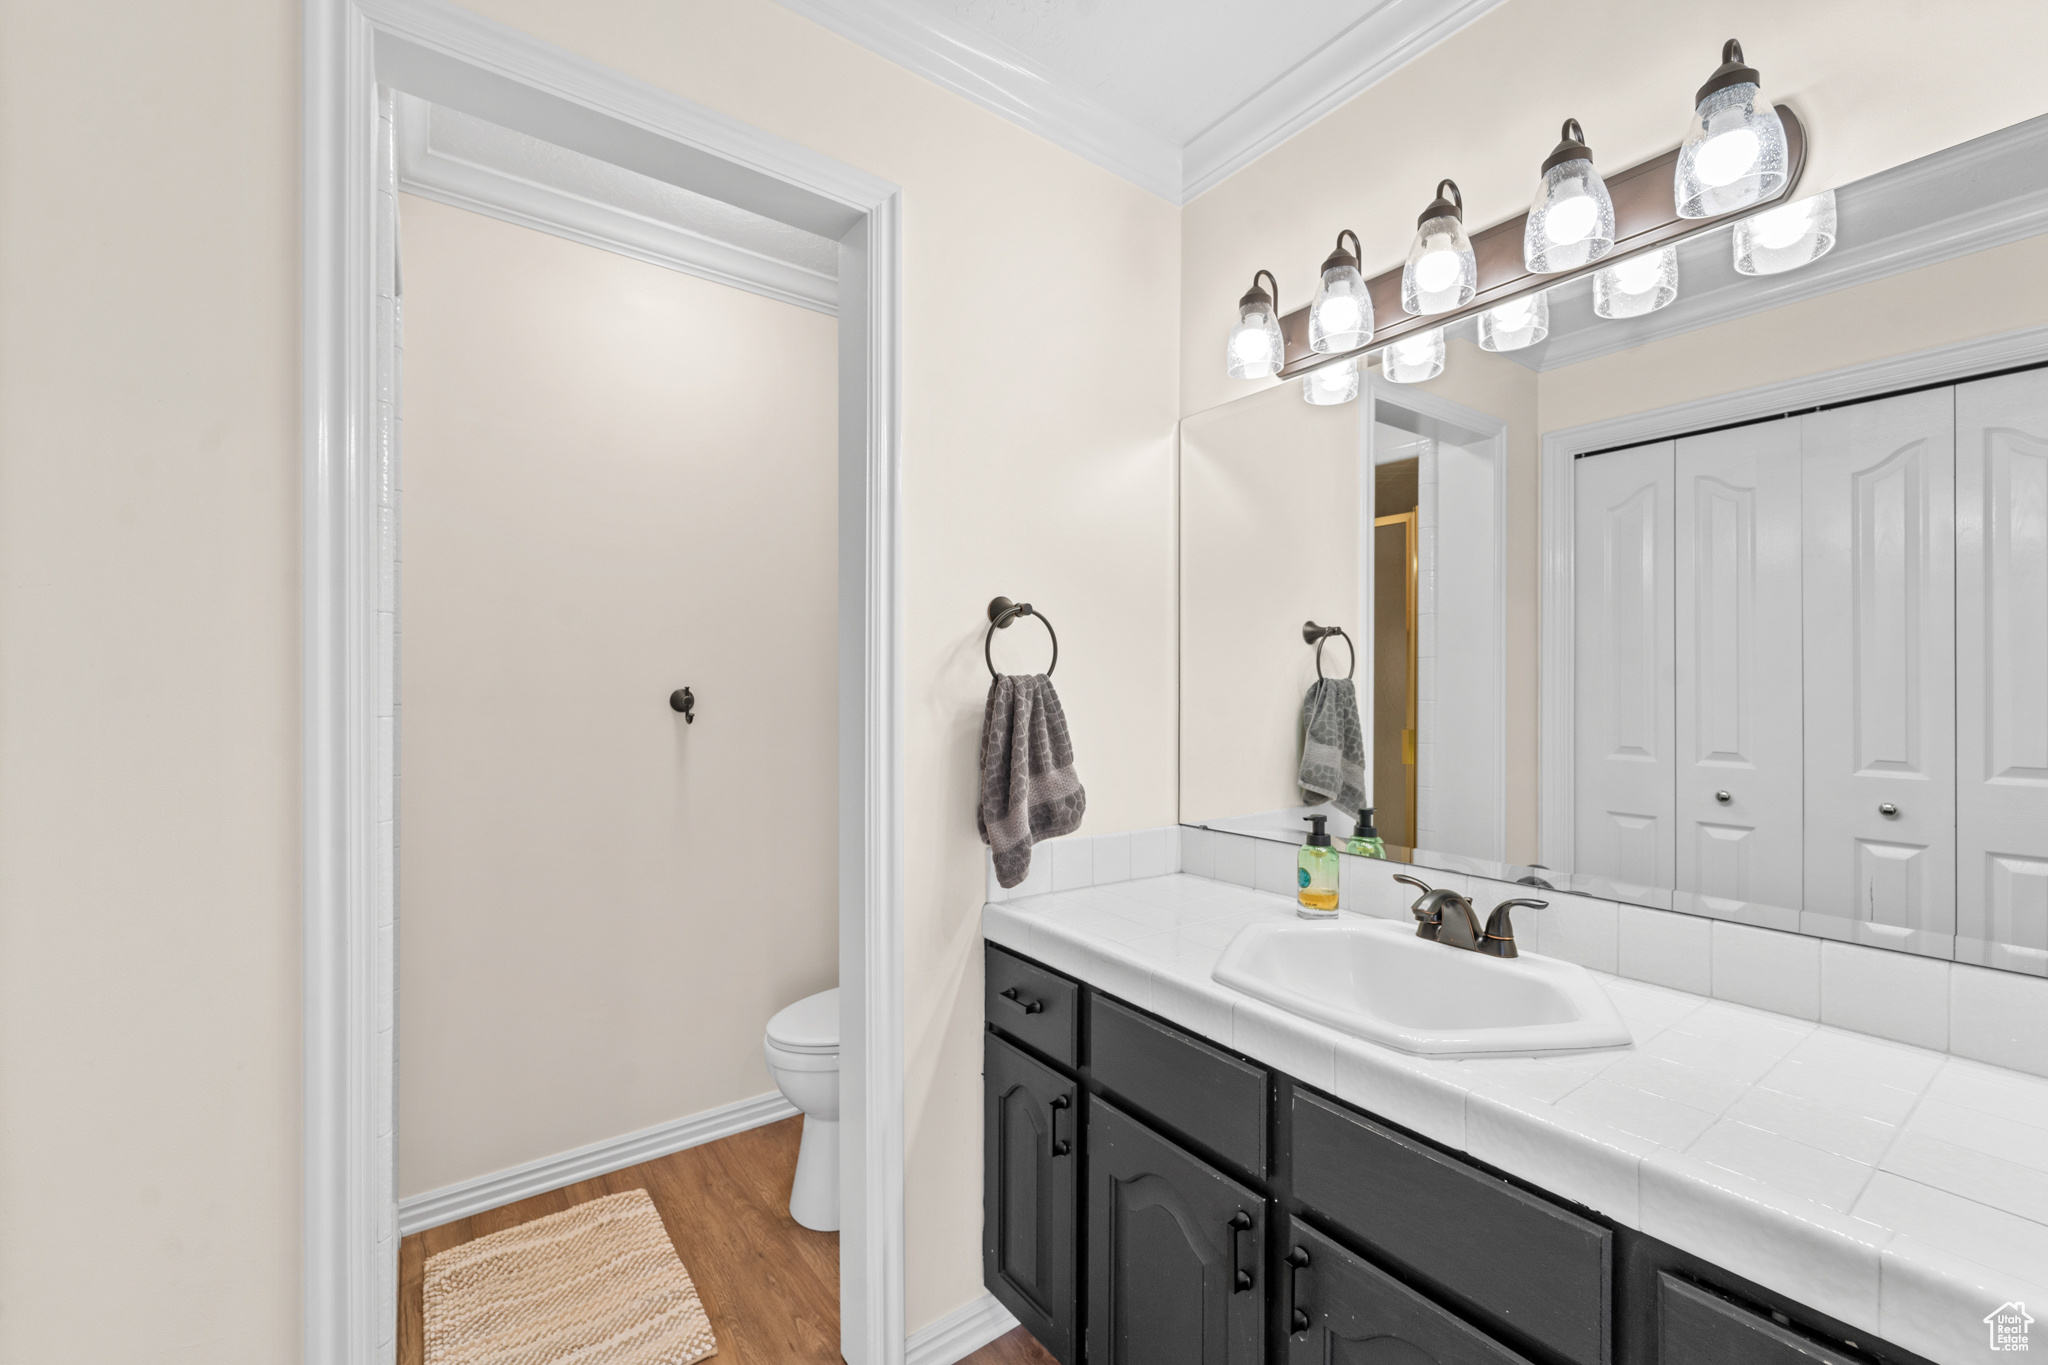 Primary Suite Bathroom with crown molding